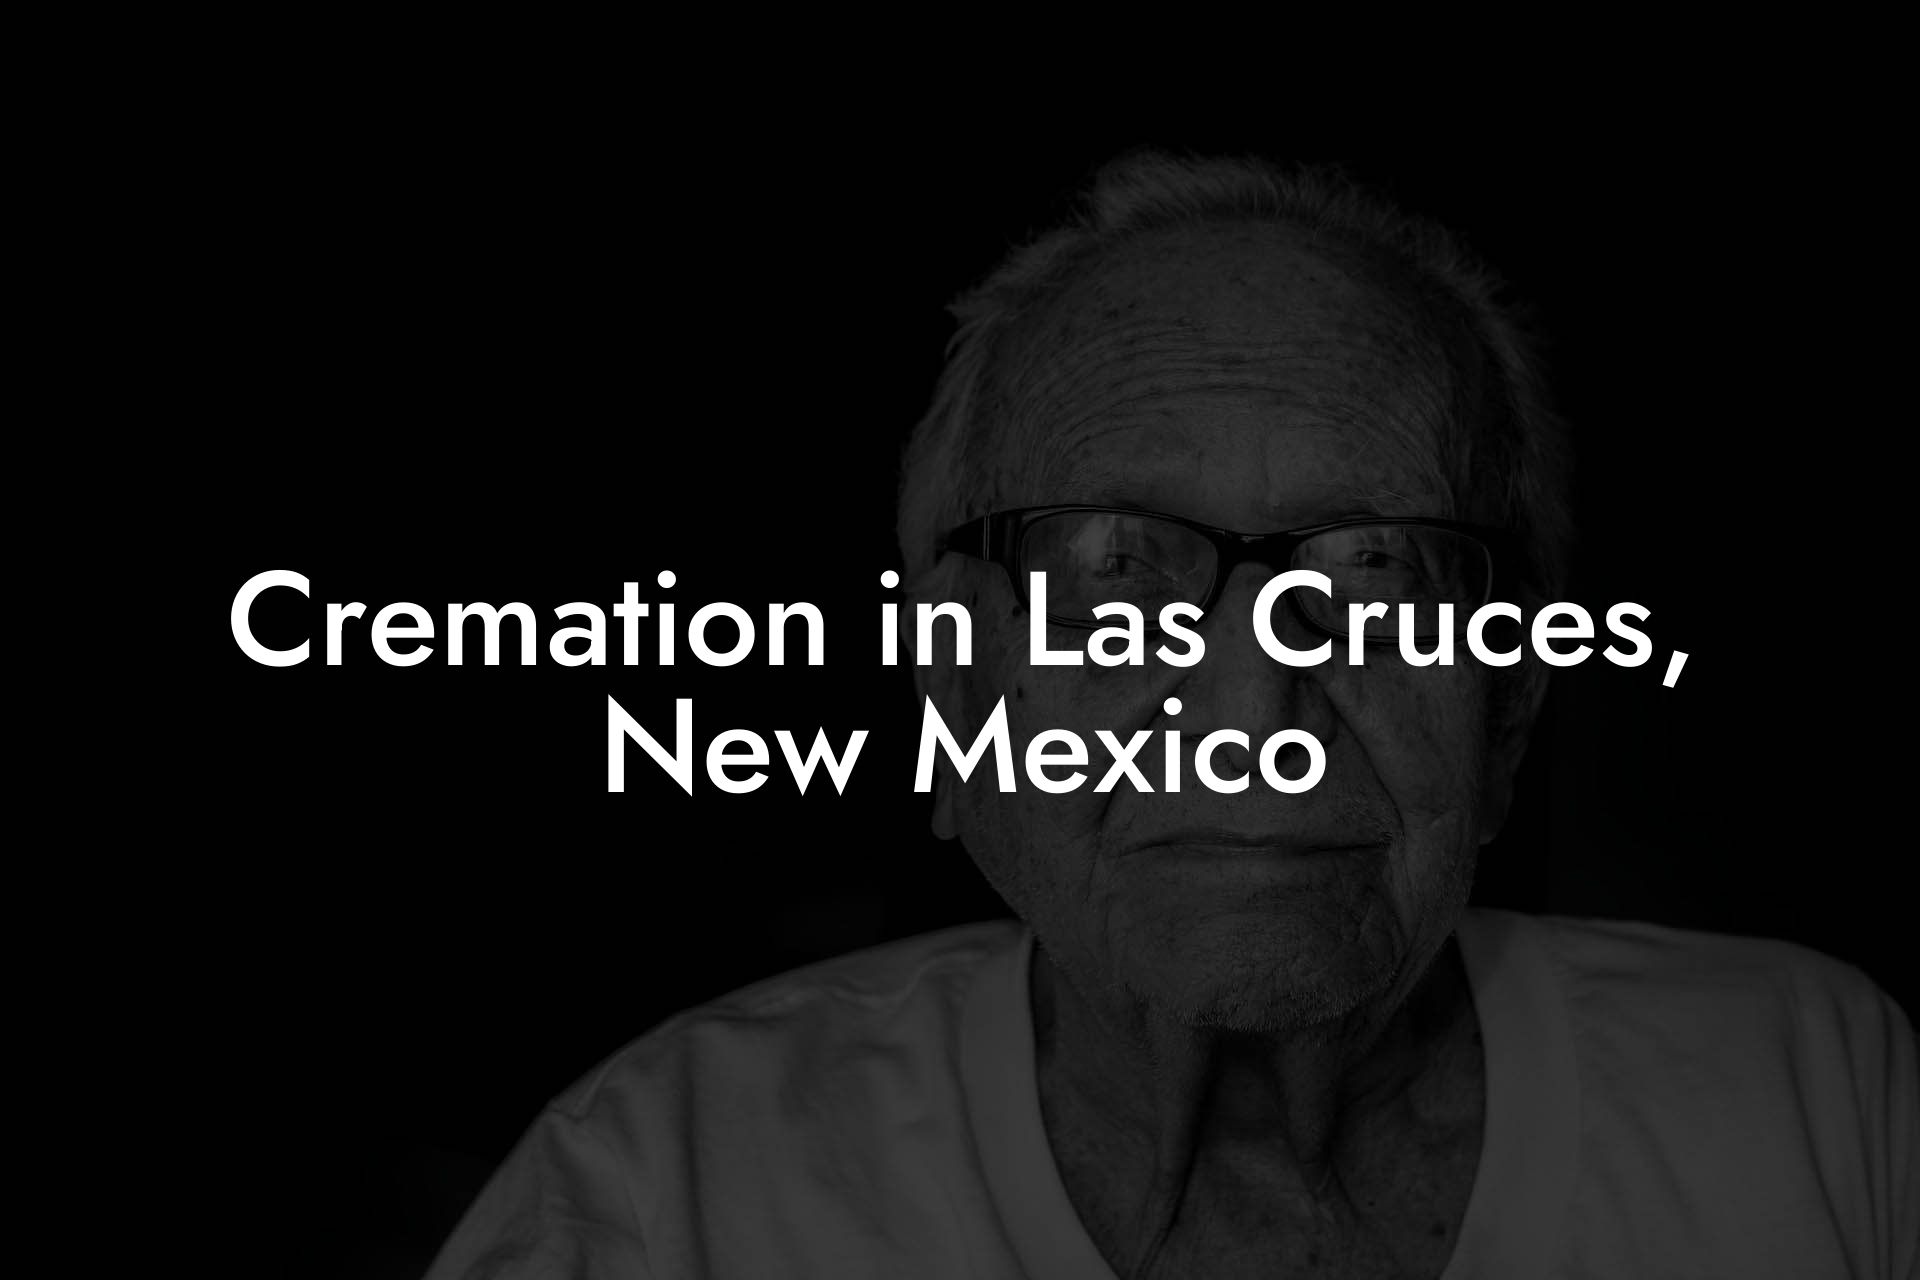 Cremation in Las Cruces, New Mexico